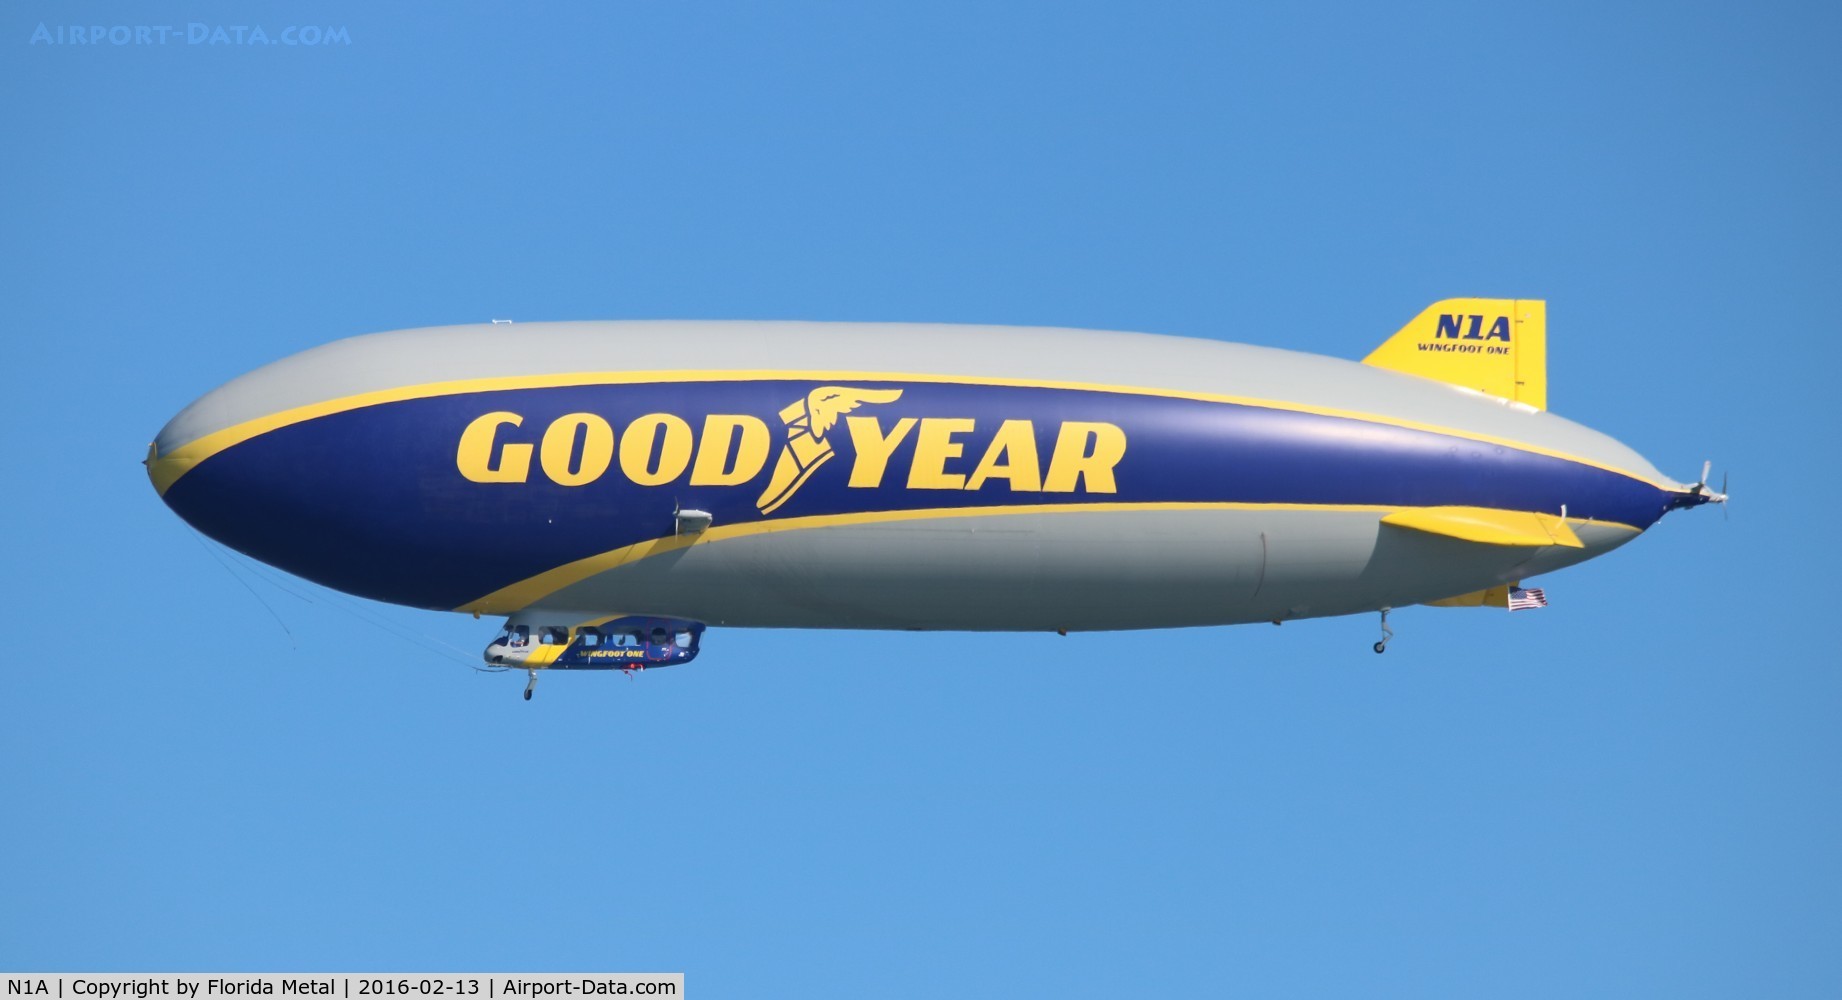 N1A, 2014 Zeppelin LZ N07-101 C/N 006, Goodyear Air Ship in flight over Ponce Inlet near New Smyrna Beach